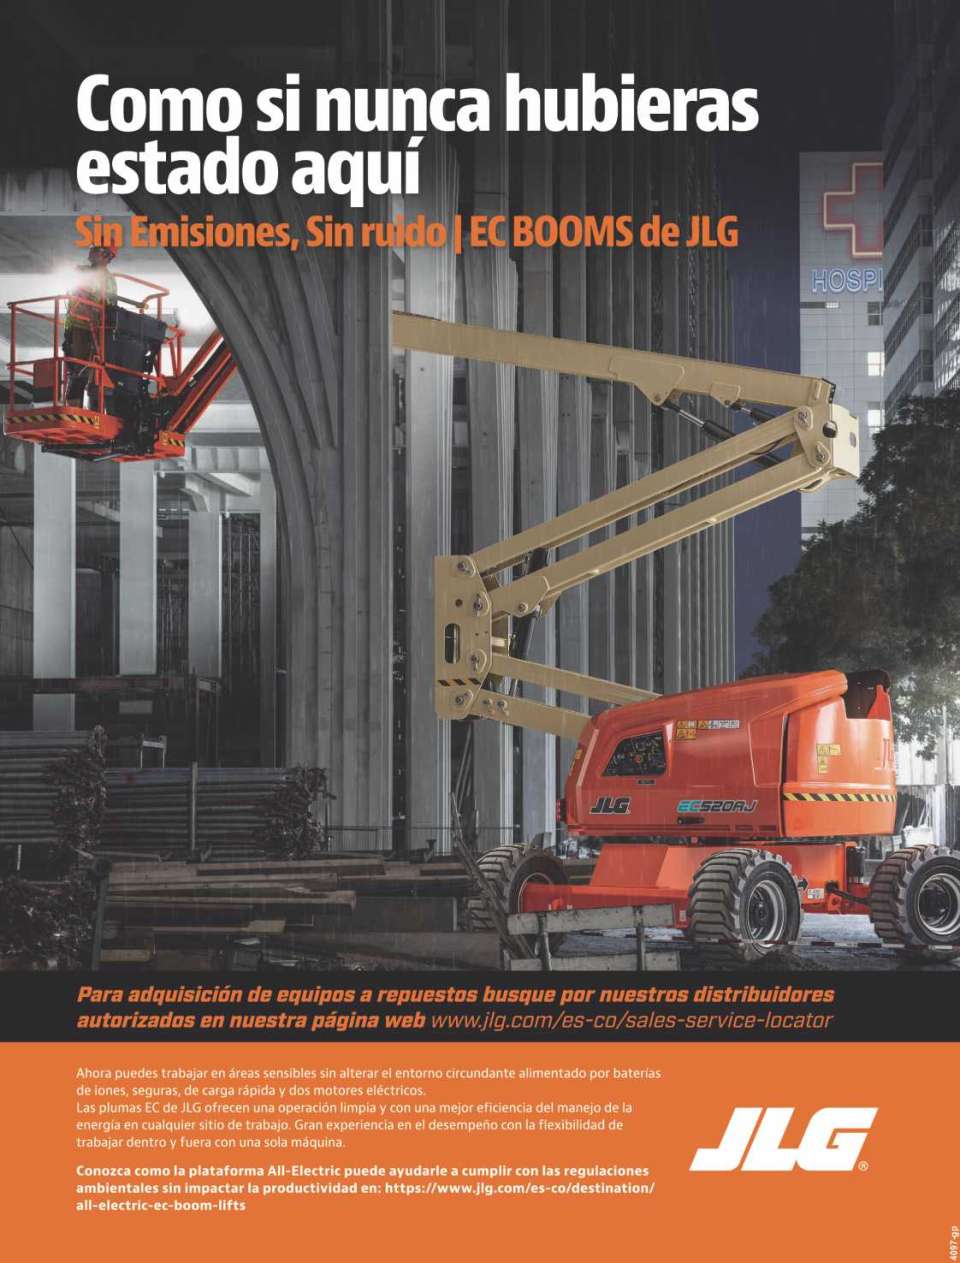 Emission-Free and Noise-Free JLG EC-BOOMS All-Electric Lifting Platforms